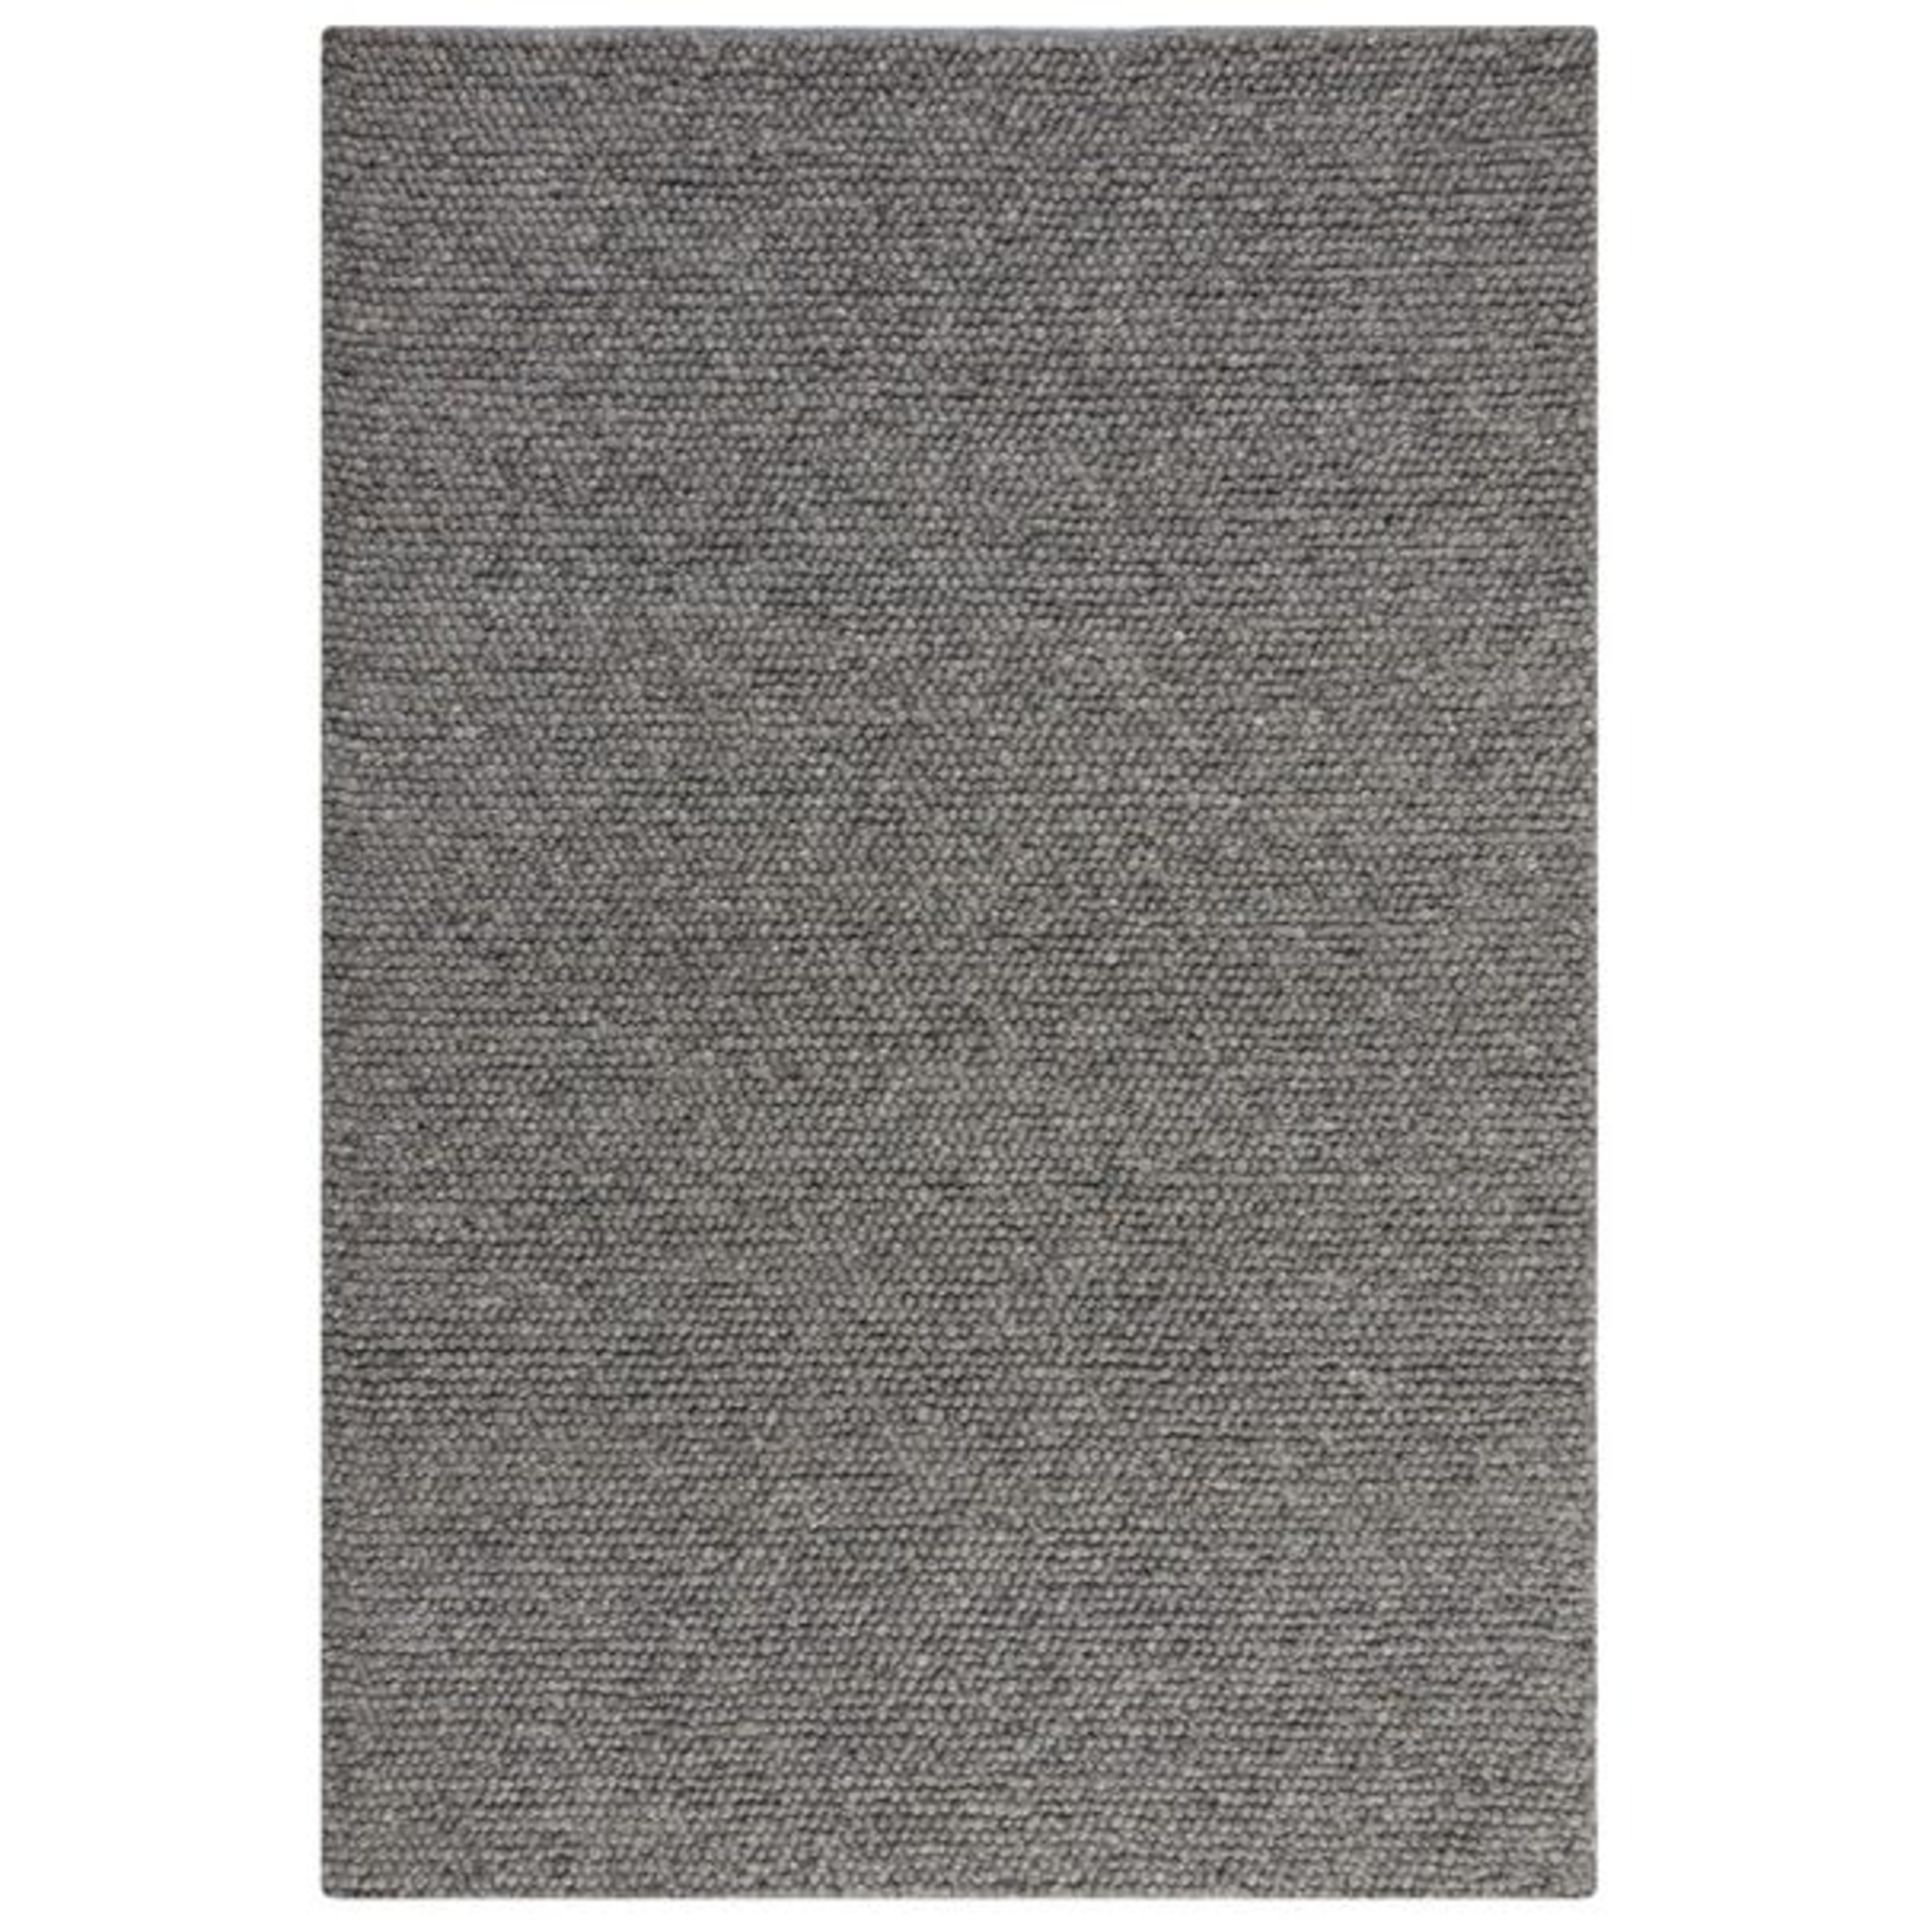 Pebble D040 Rug Pebble Charcoal Rectangle 200X290cm RRP 449 About the Product(s) Pebble D040 Rug - Image 2 of 3